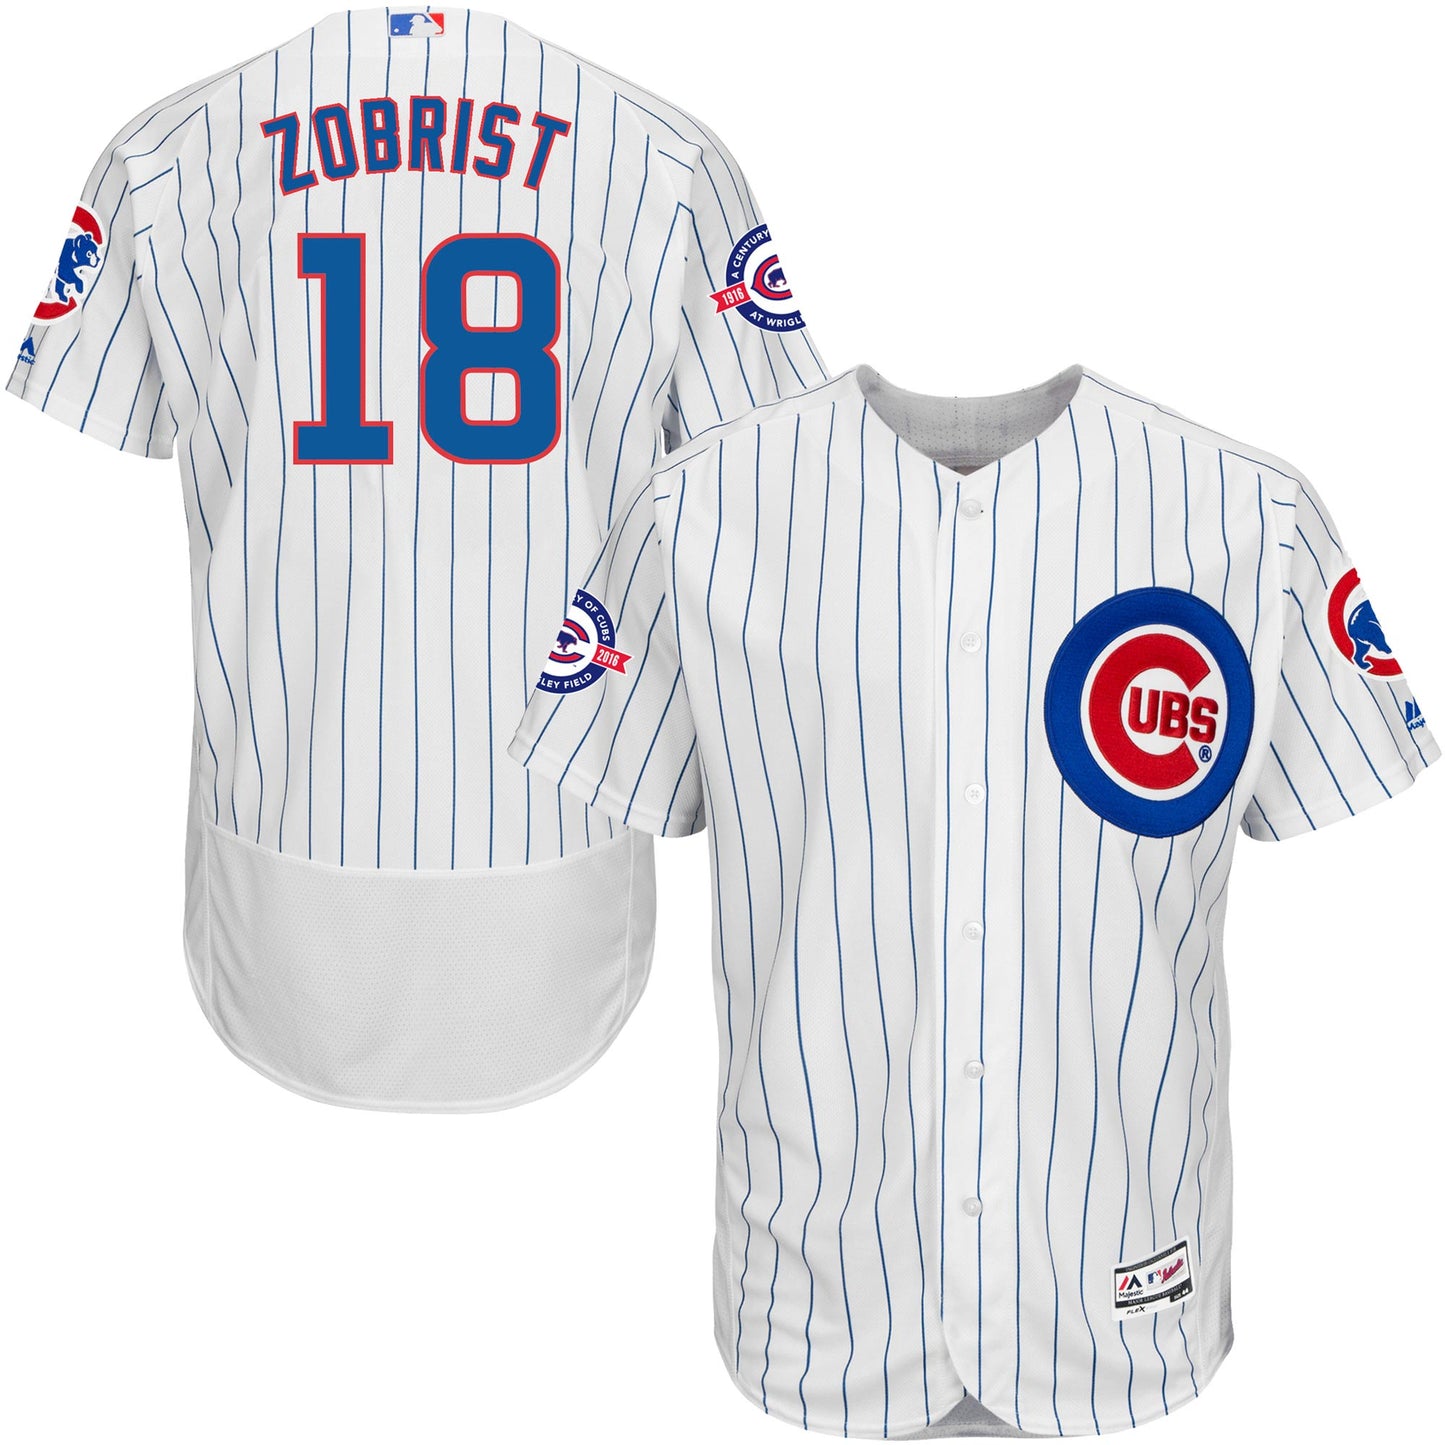 Chicago Cubs Ben Zobrist Majestic Home Flexbase Authentic Jersey with 100 Years at Wrigley Field Commemorative Patch